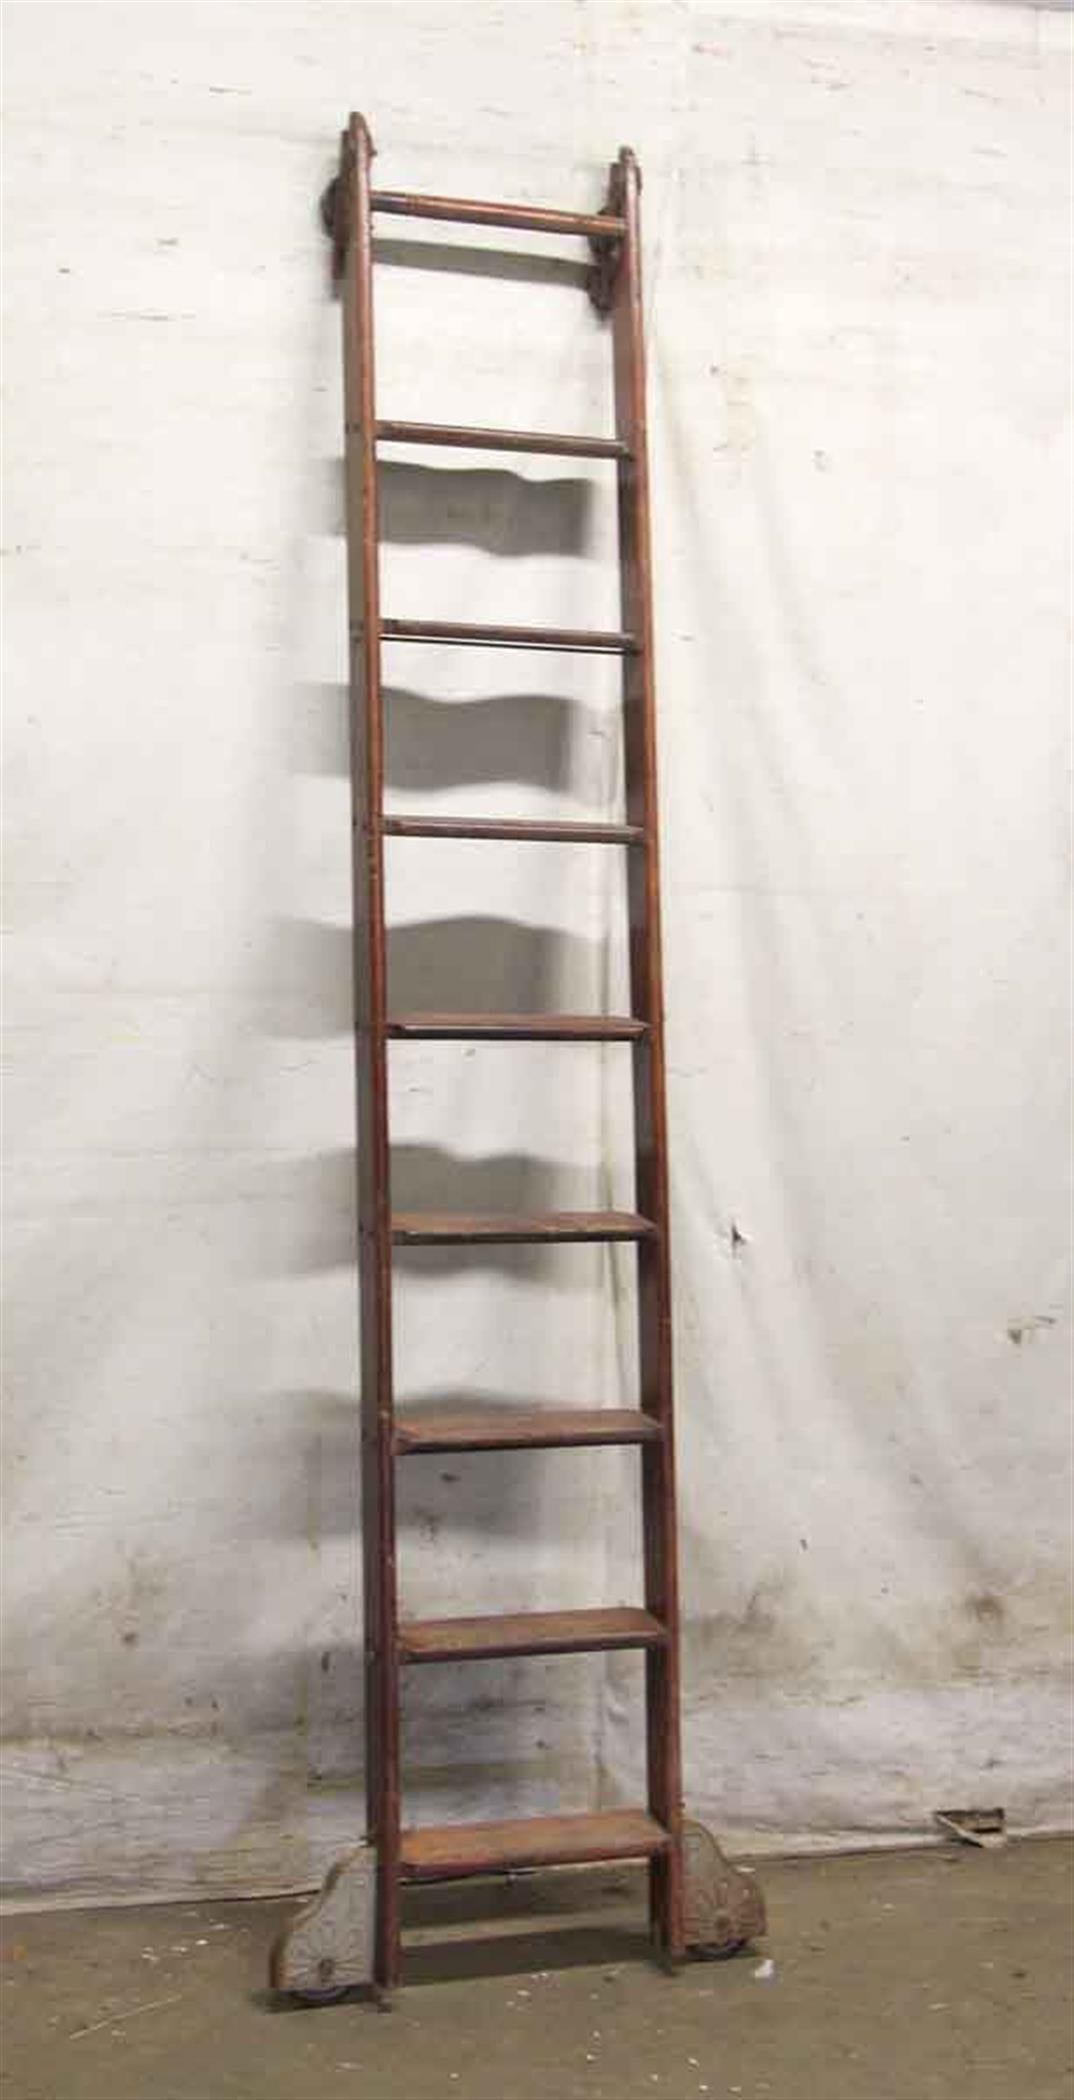 Original oak rolling library ladder with great patina. Made by Putnam, circa 1940. This can be seen at our 2420 Broadway location on the upper west side in Manhattan.